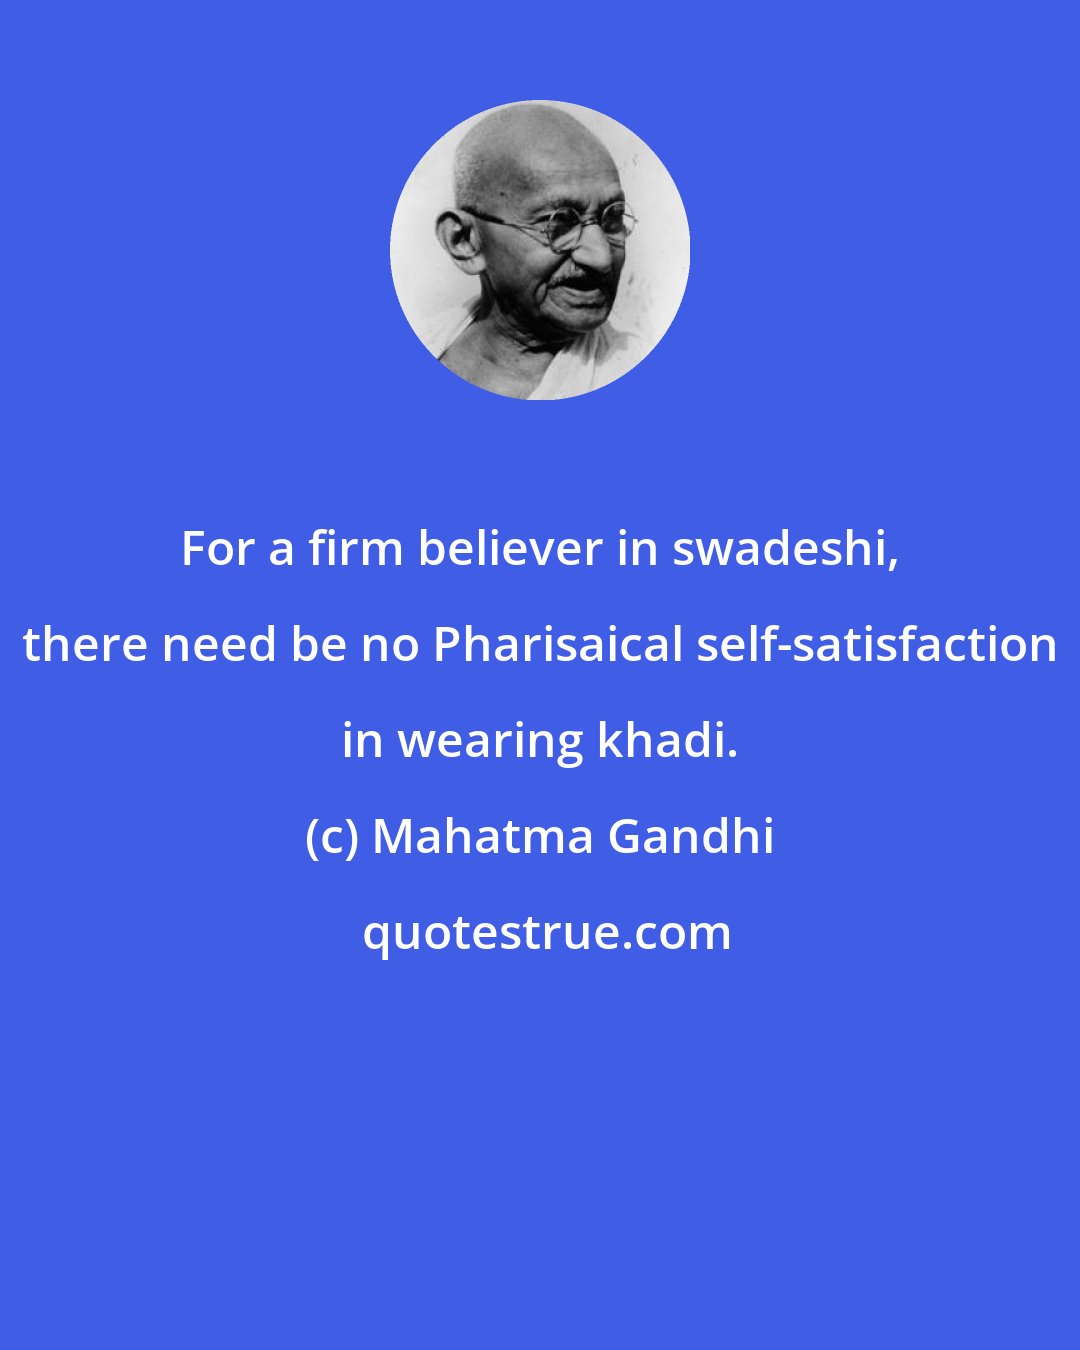 Mahatma Gandhi: For a firm believer in swadeshi, there need be no Pharisaical self-satisfaction in wearing khadi.